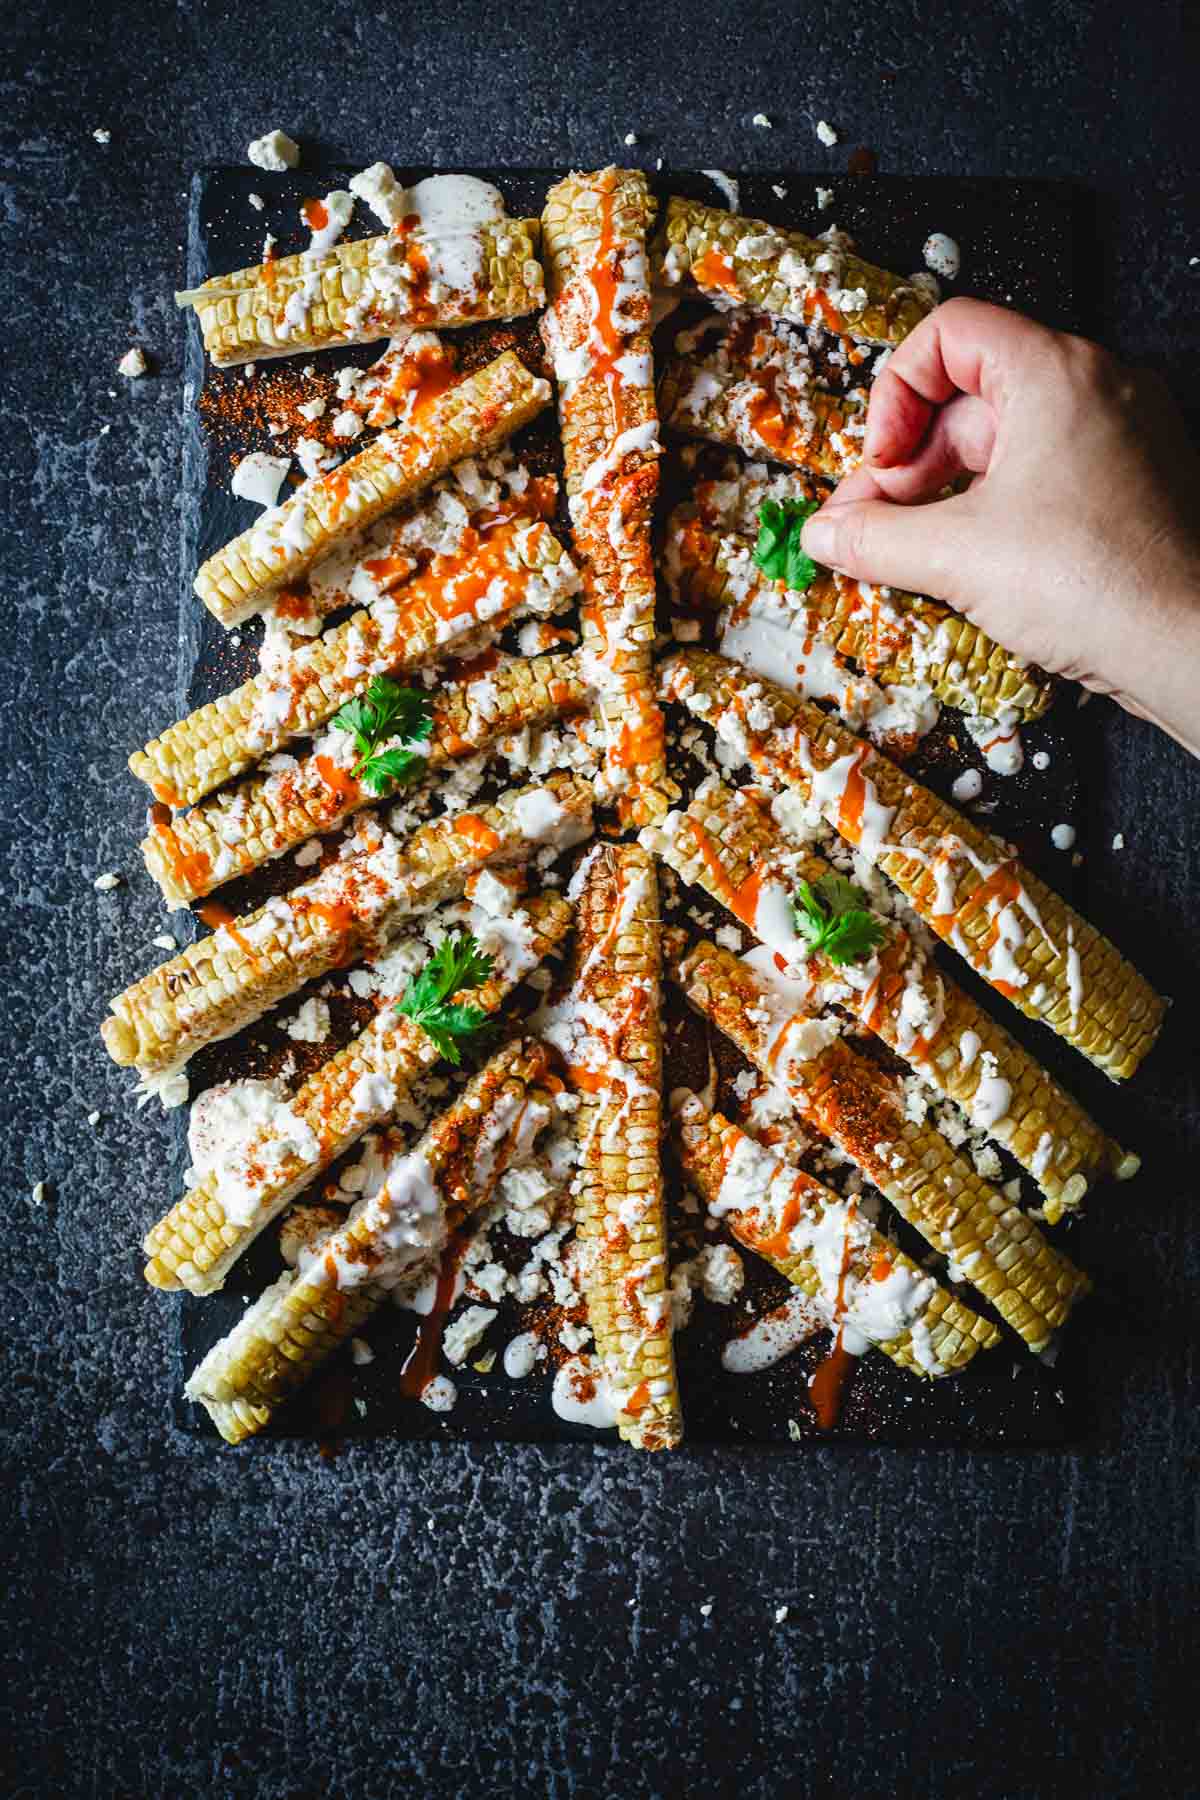 Corn on the cob with someone placing cilantro on top.